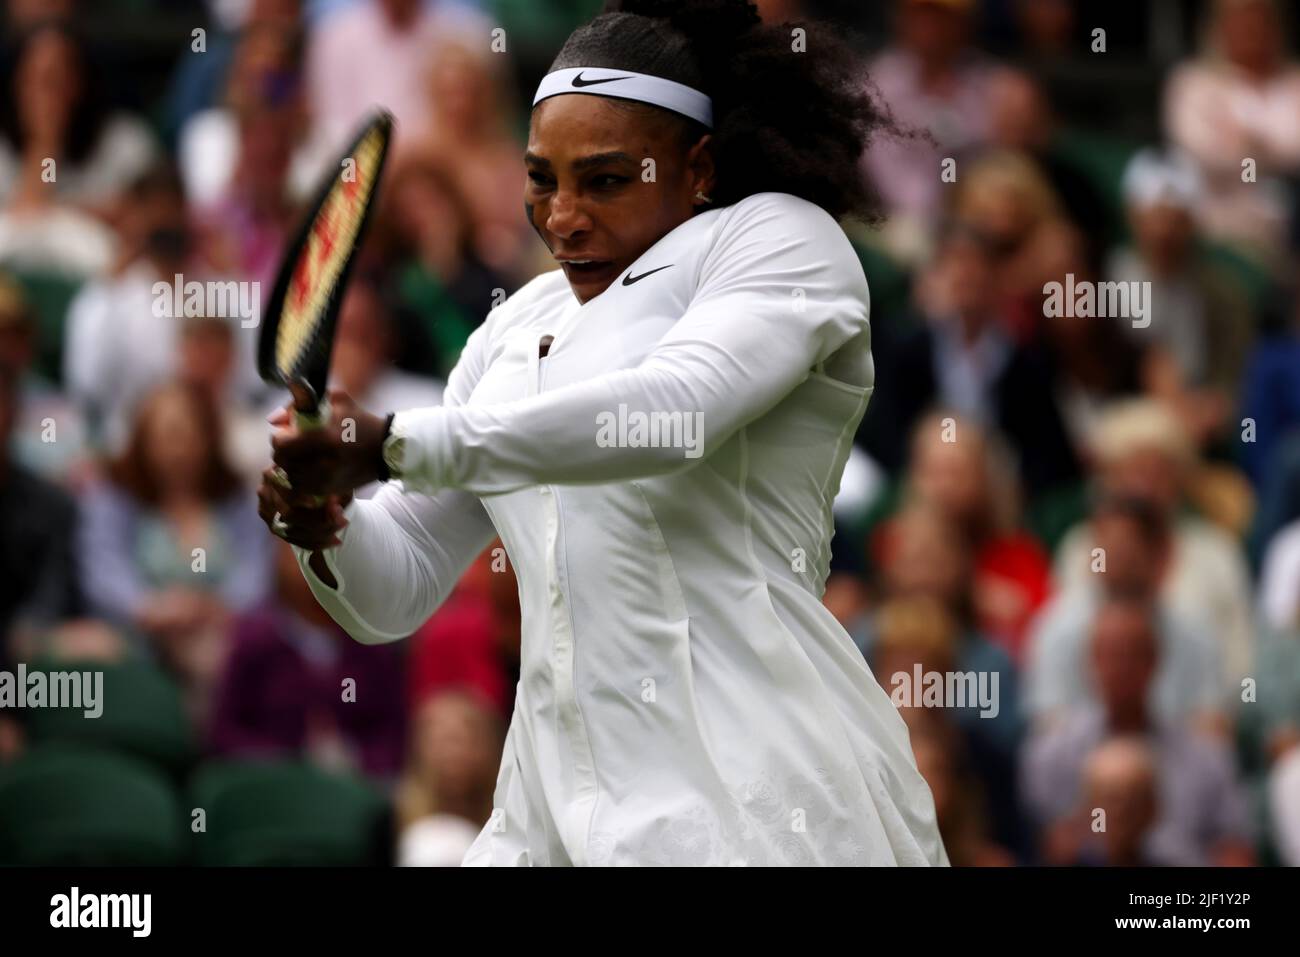 London, 28 June 2022 - ondon, 28 June 2022 - Serena Williams during her first round loss to Harmony Tan of France on Centre Court at Wimbledon today. Credit: Adam Stoltman/Alamy Live News Stock Photo